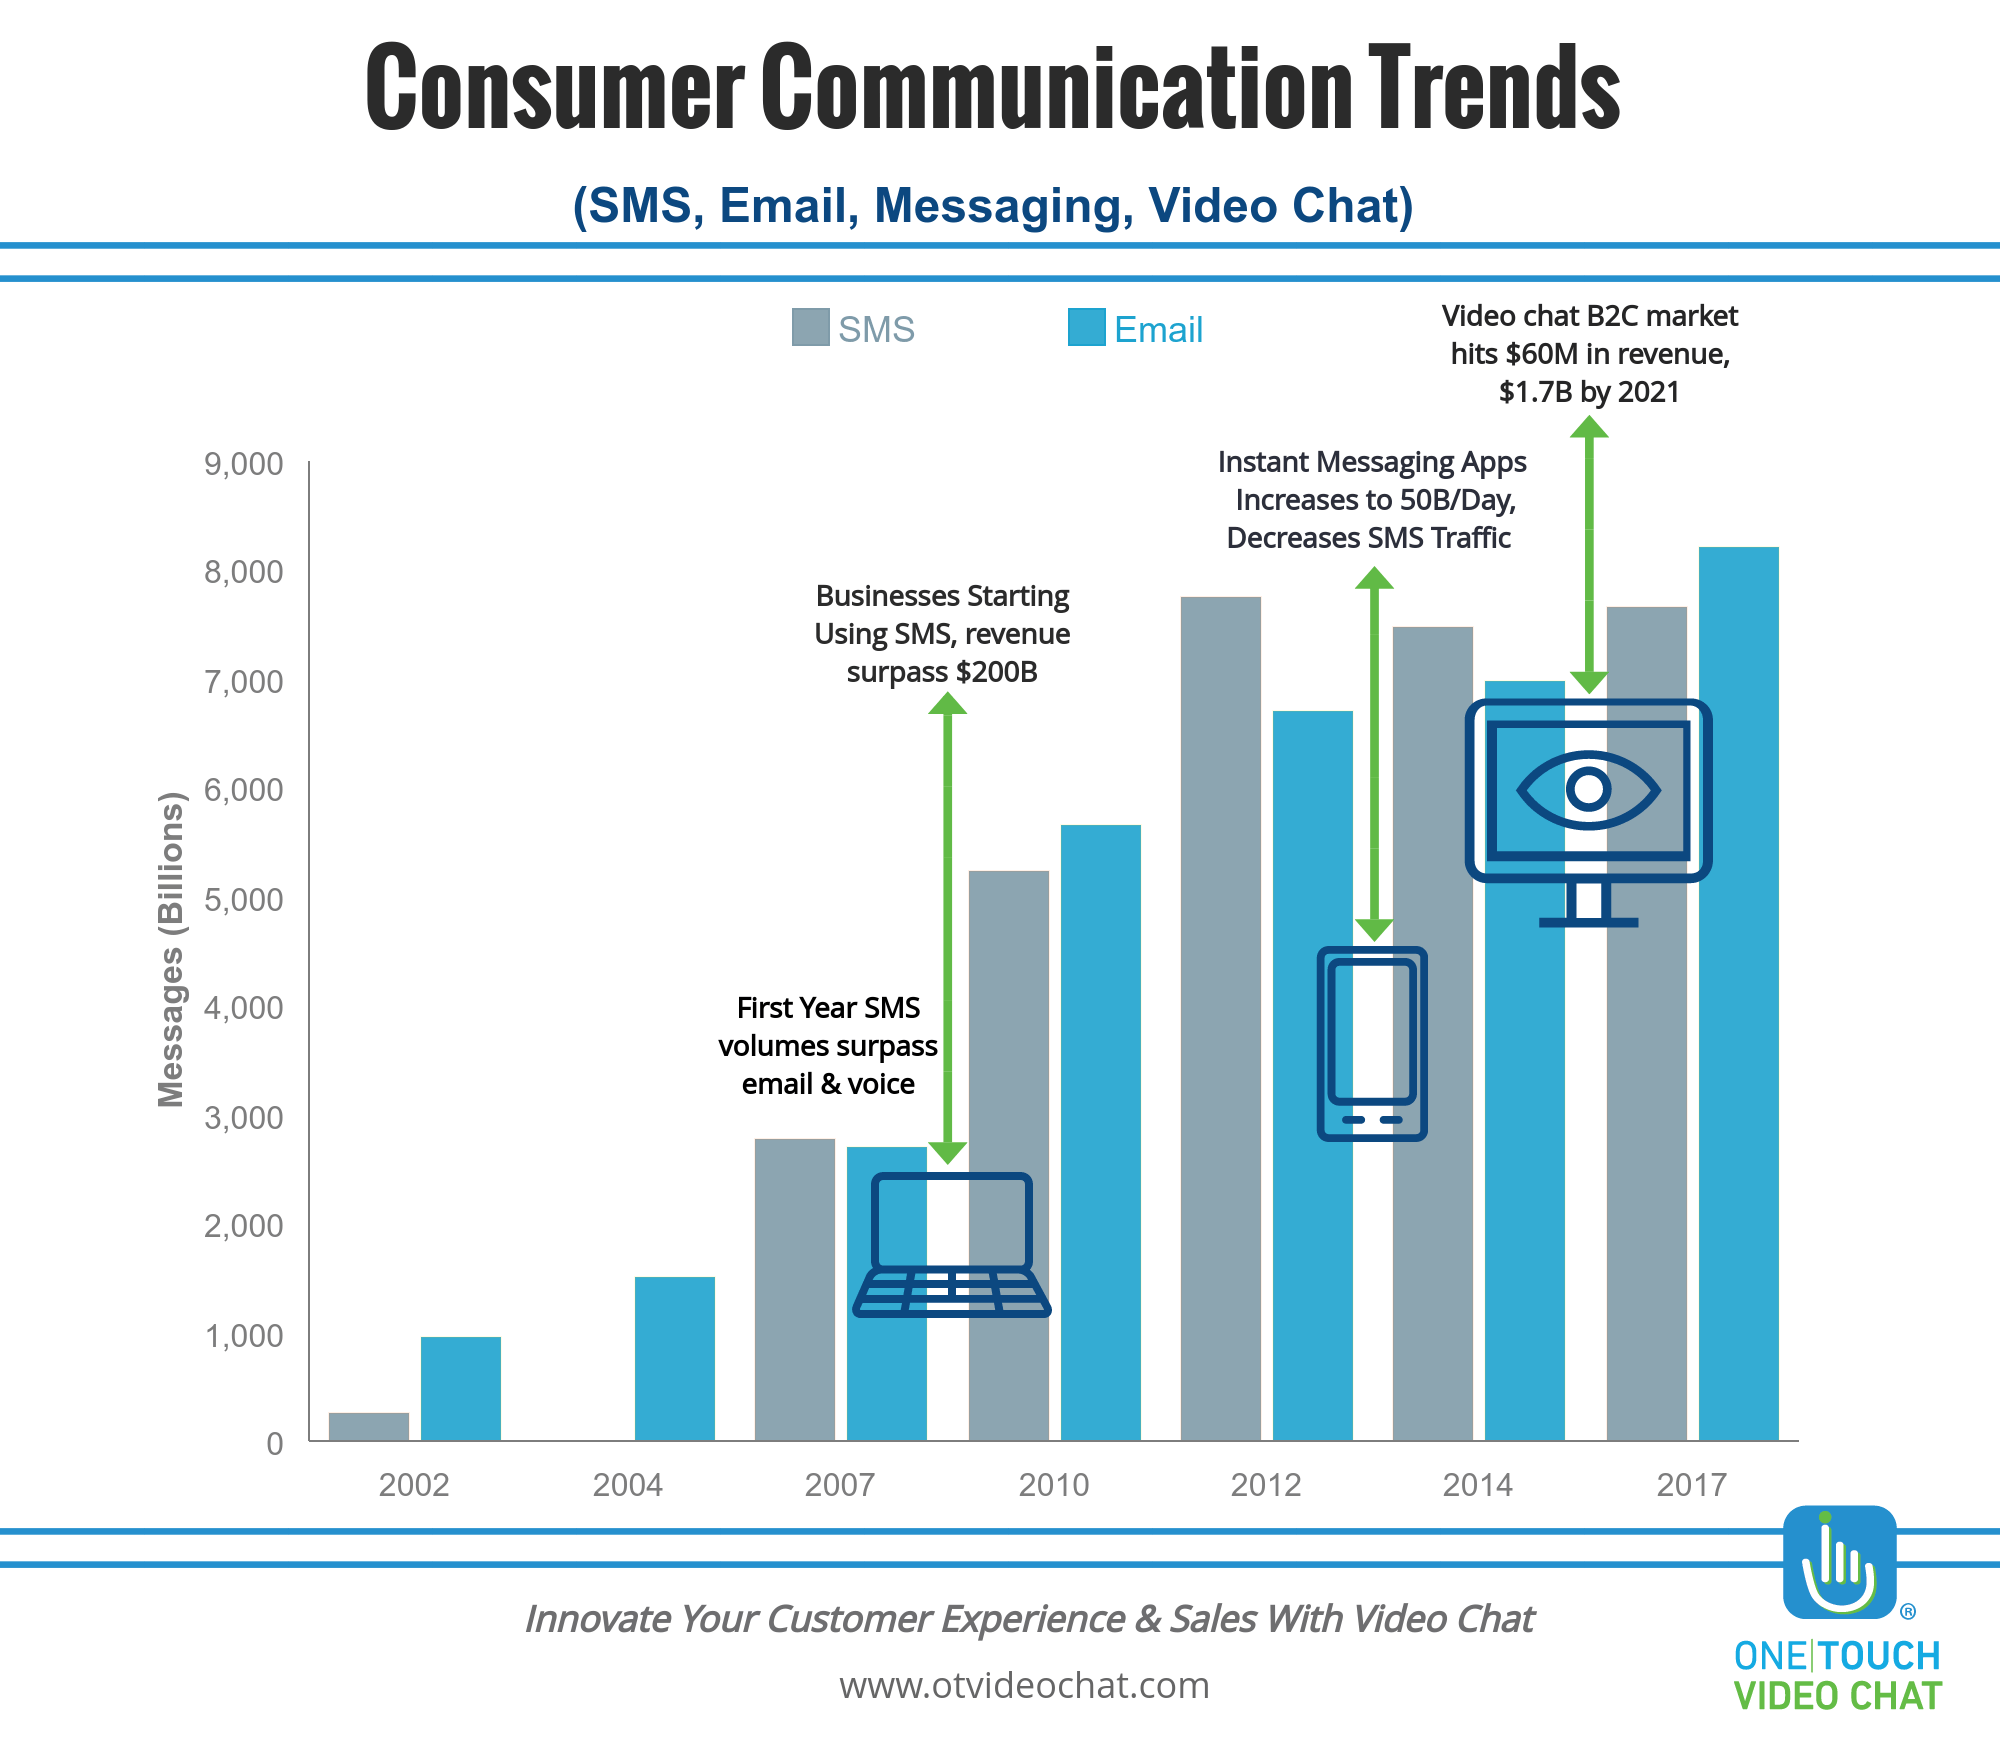 Consumer Communication Trends: Video Chat Is Here